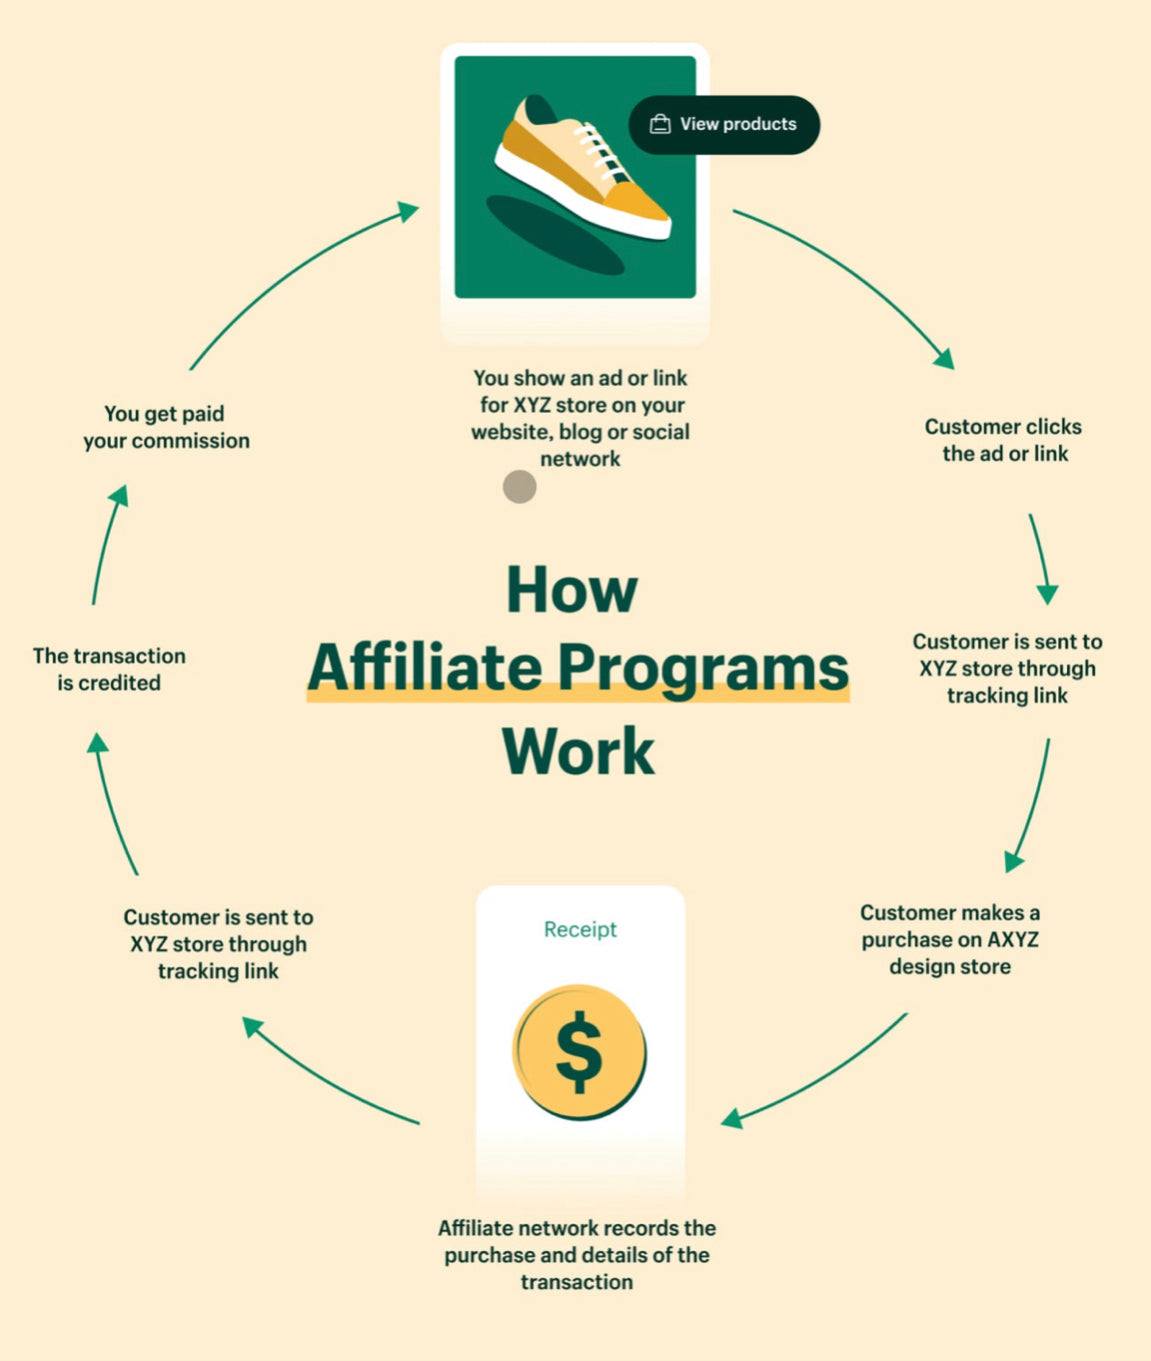 What is the highest profit you earned as an clickbank affiliate? - Quora